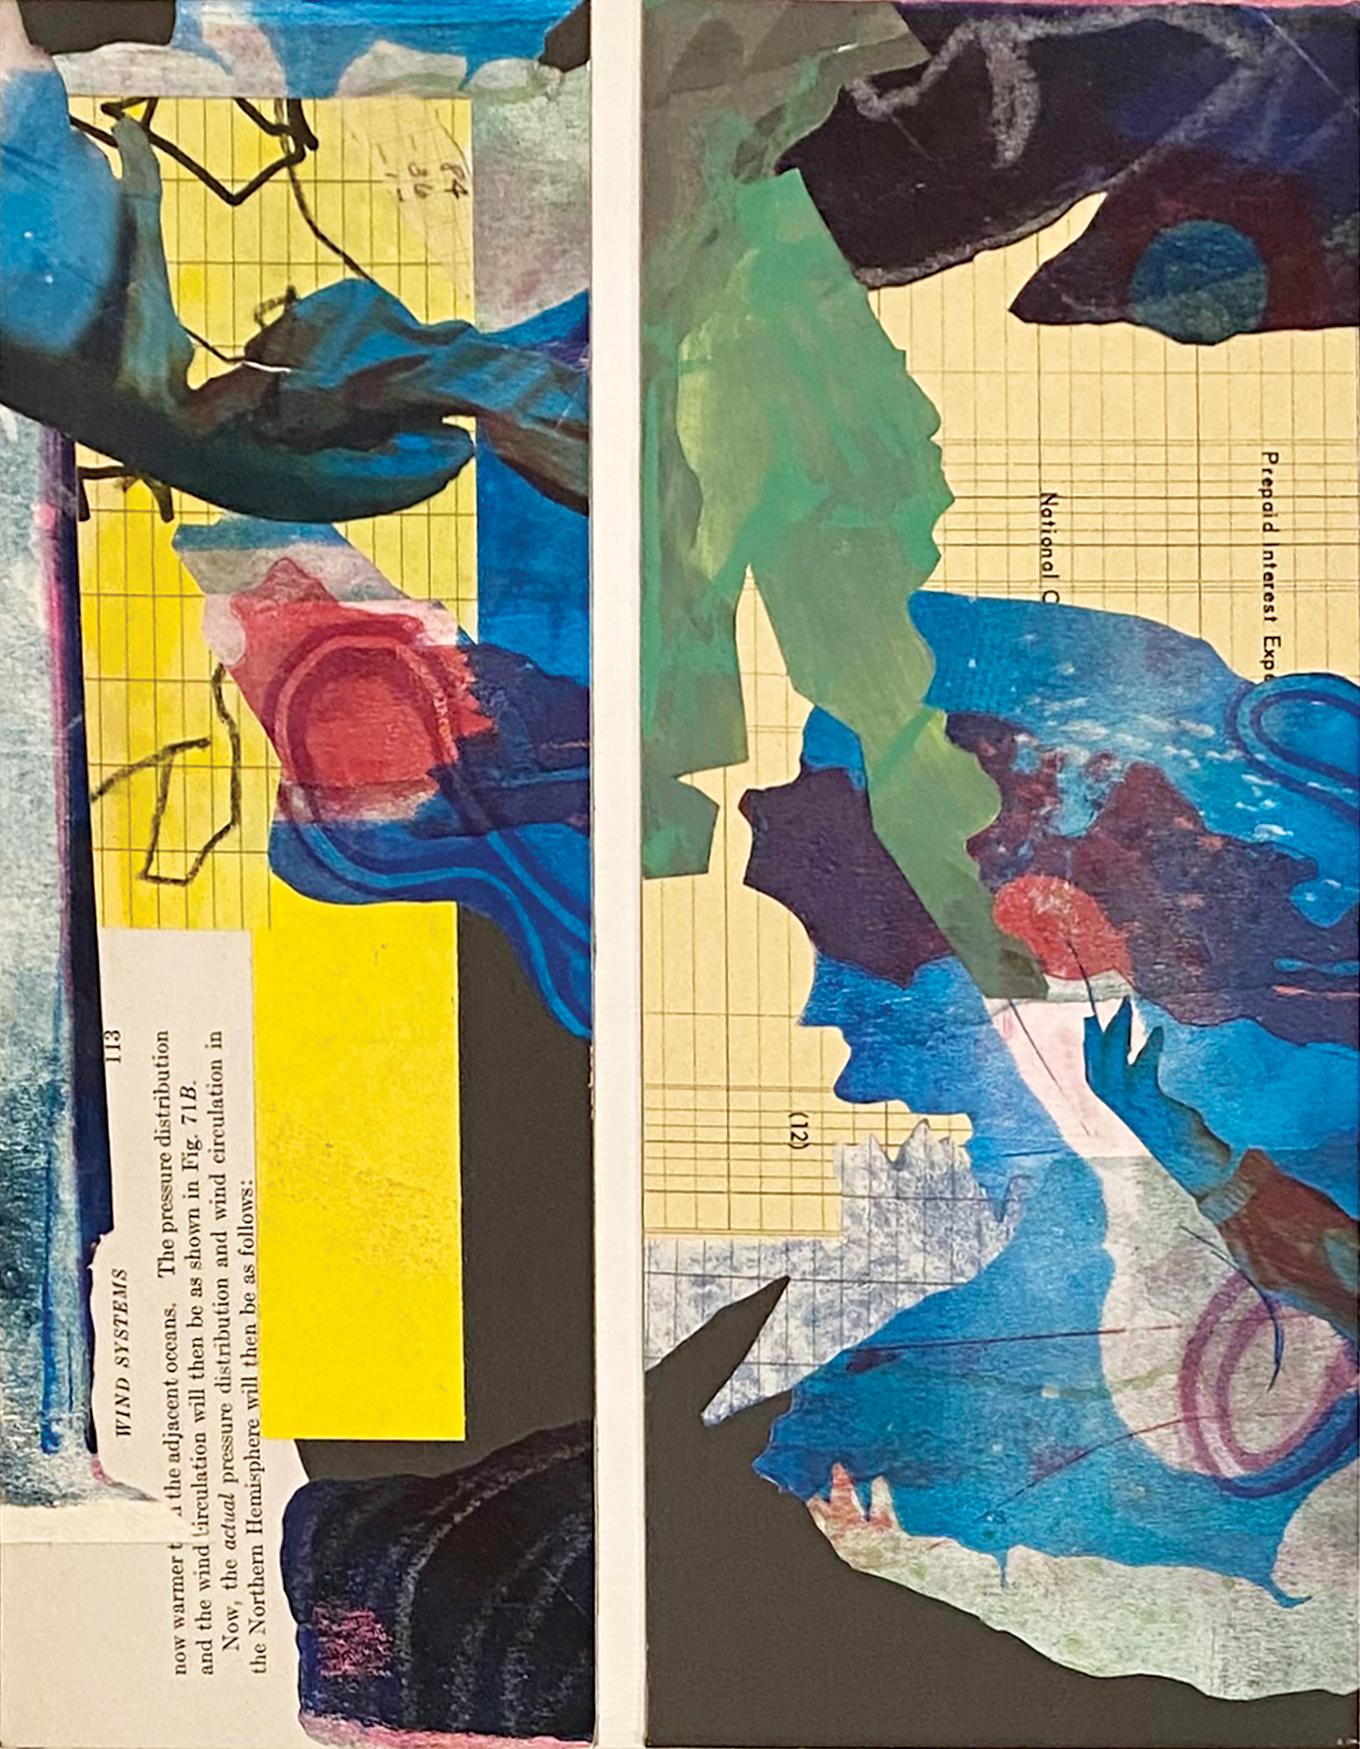 "Wind Systems", abstract, yellow, blue, green, gray, diptych, collage, monotype